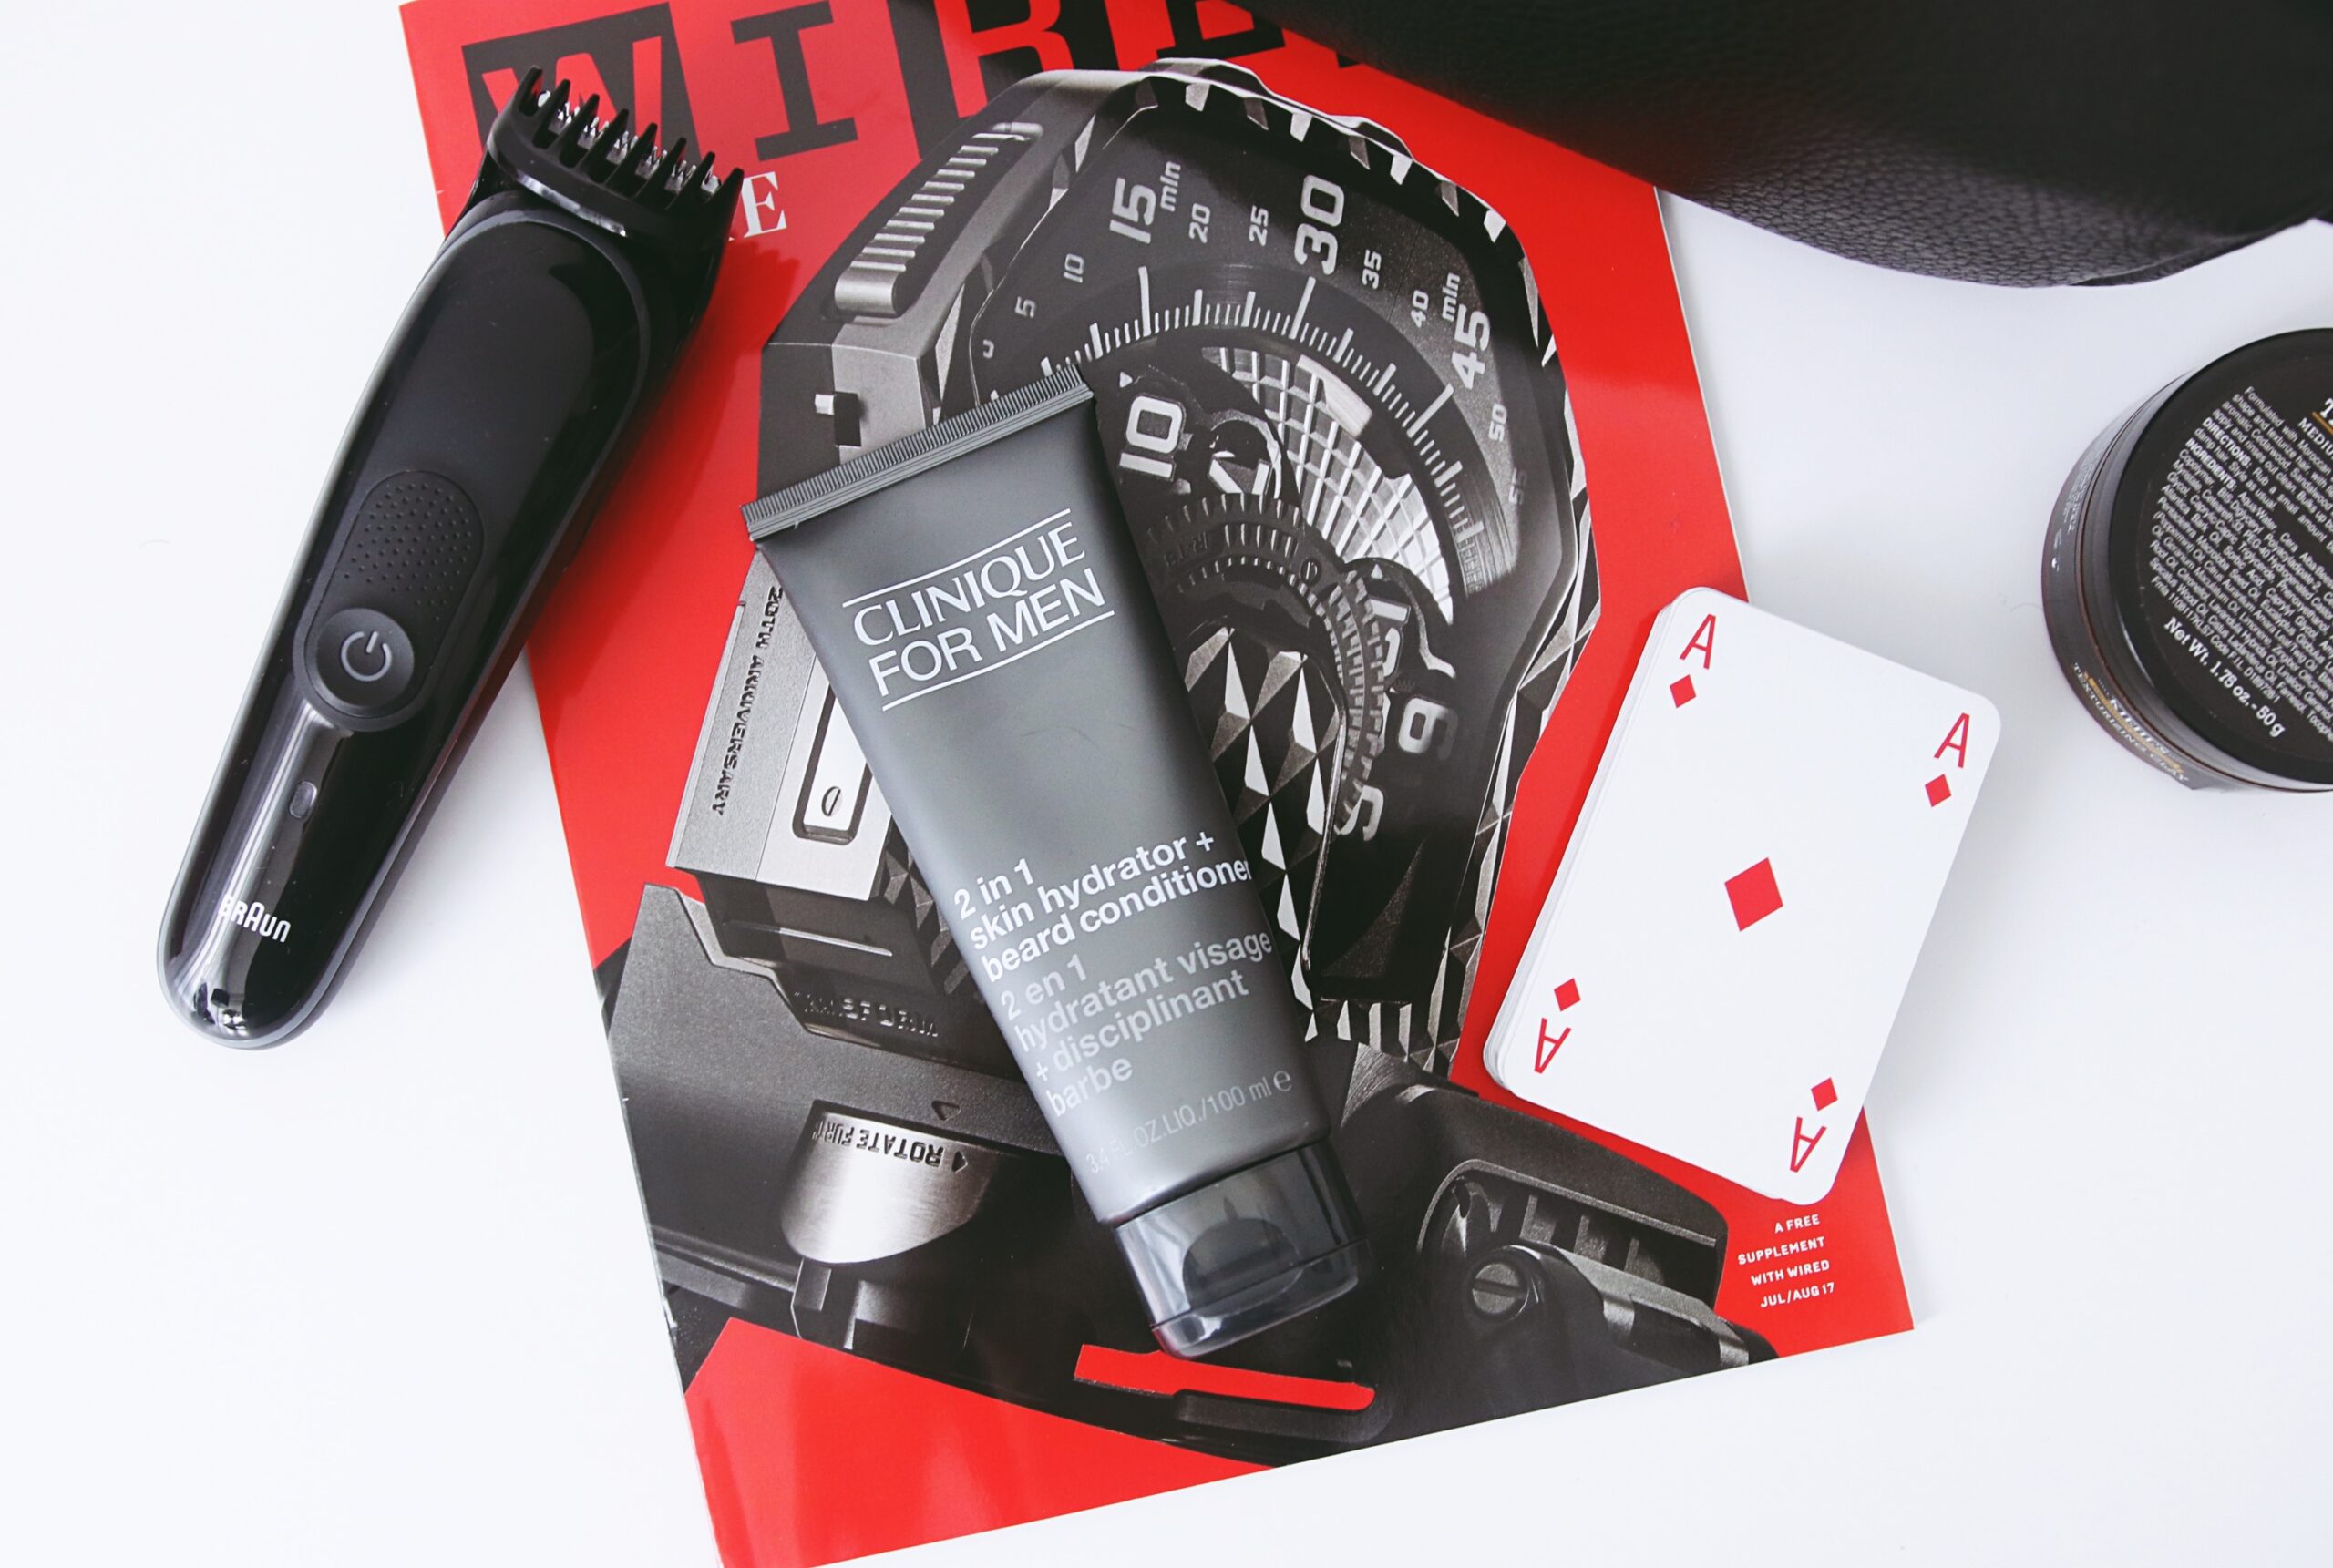 Clinique 2 in 1 Skin Hydrator & Beard Conditioner Review - Mens Lifestyle Blog The LDN Diaries